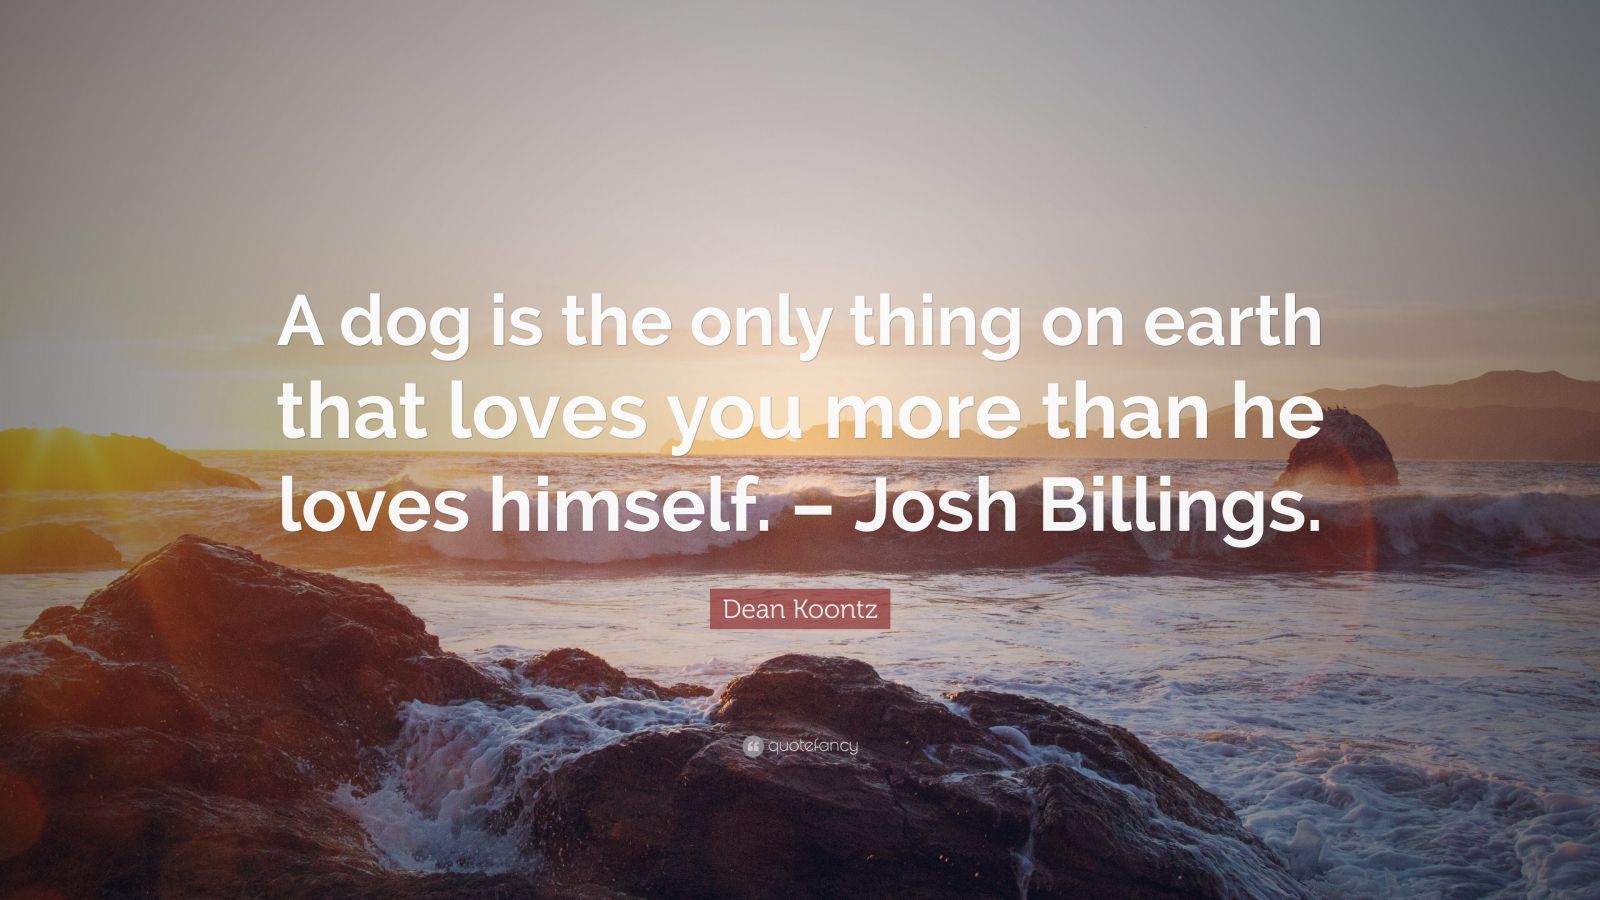 Dean Koontz Quote: “A dog is the only thing on earth that loves you ...